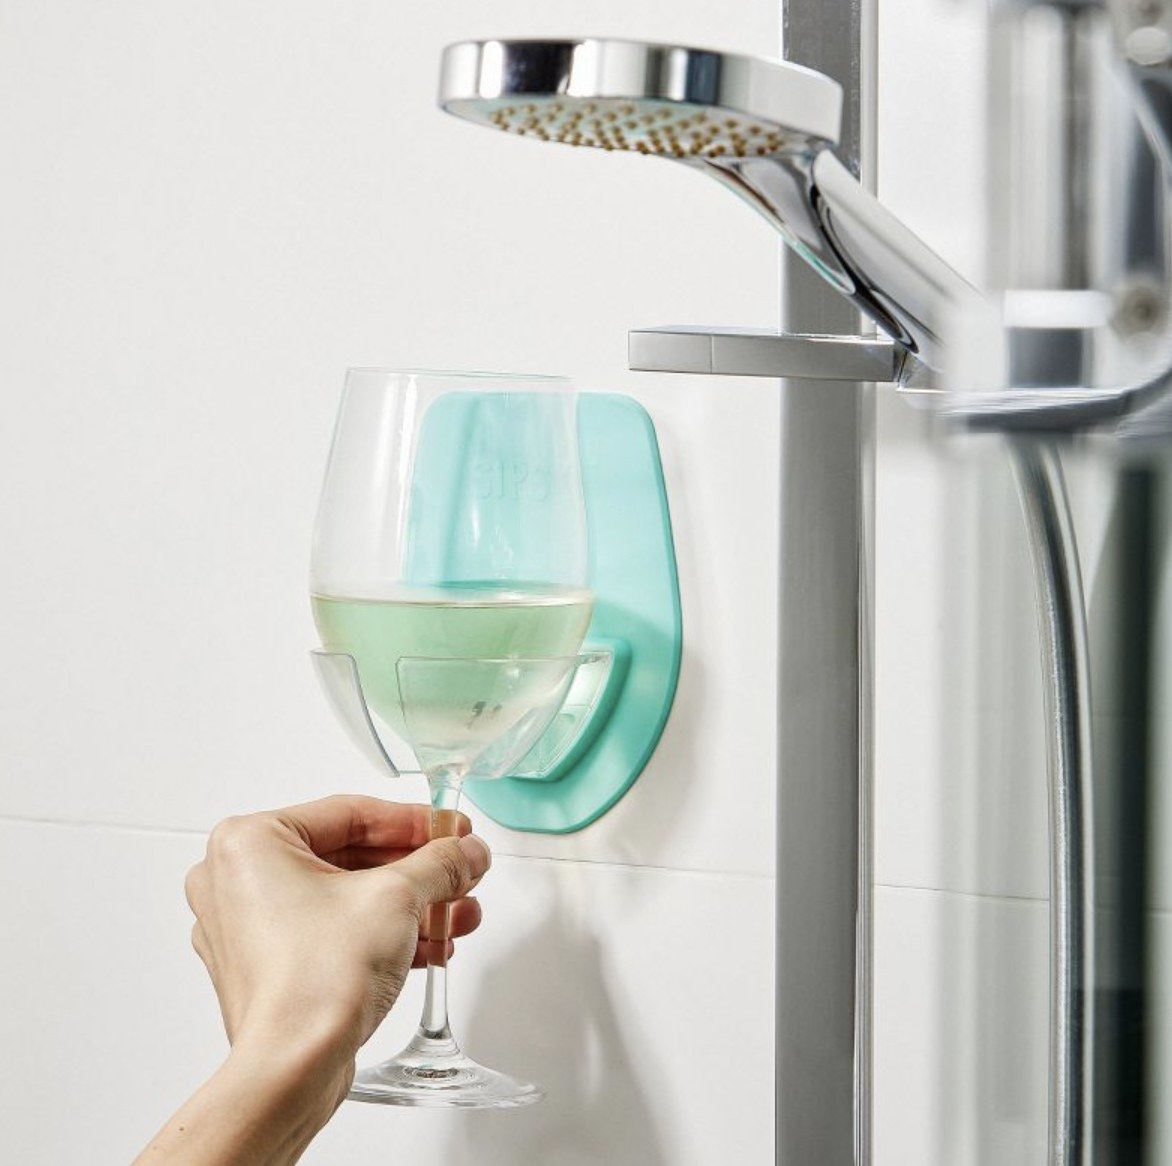 The teal wine holder adhered to side of shower and holding glass of white wine